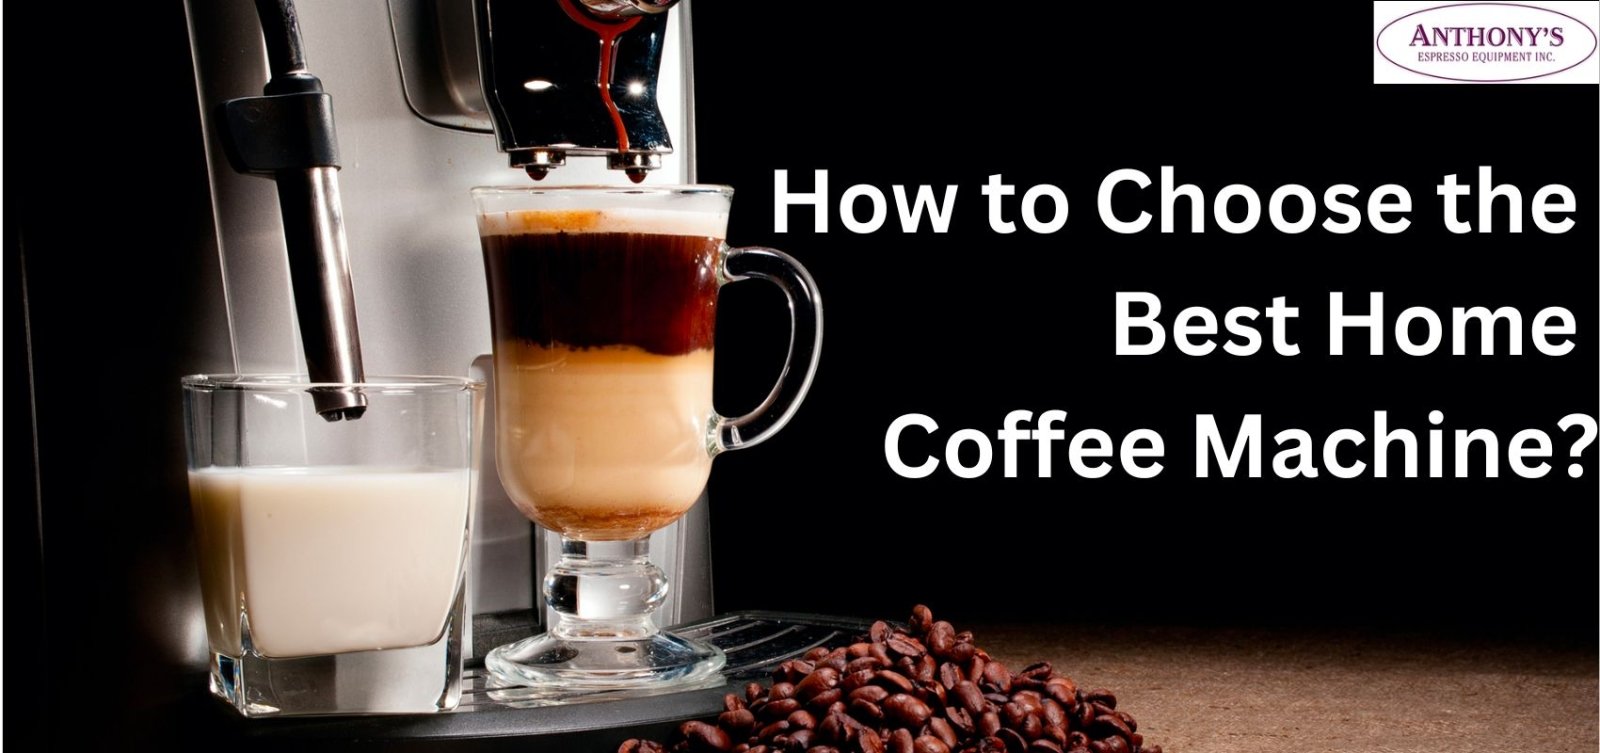 How to Choose the Best Home Coffee Machine? - Anthony's Espresso